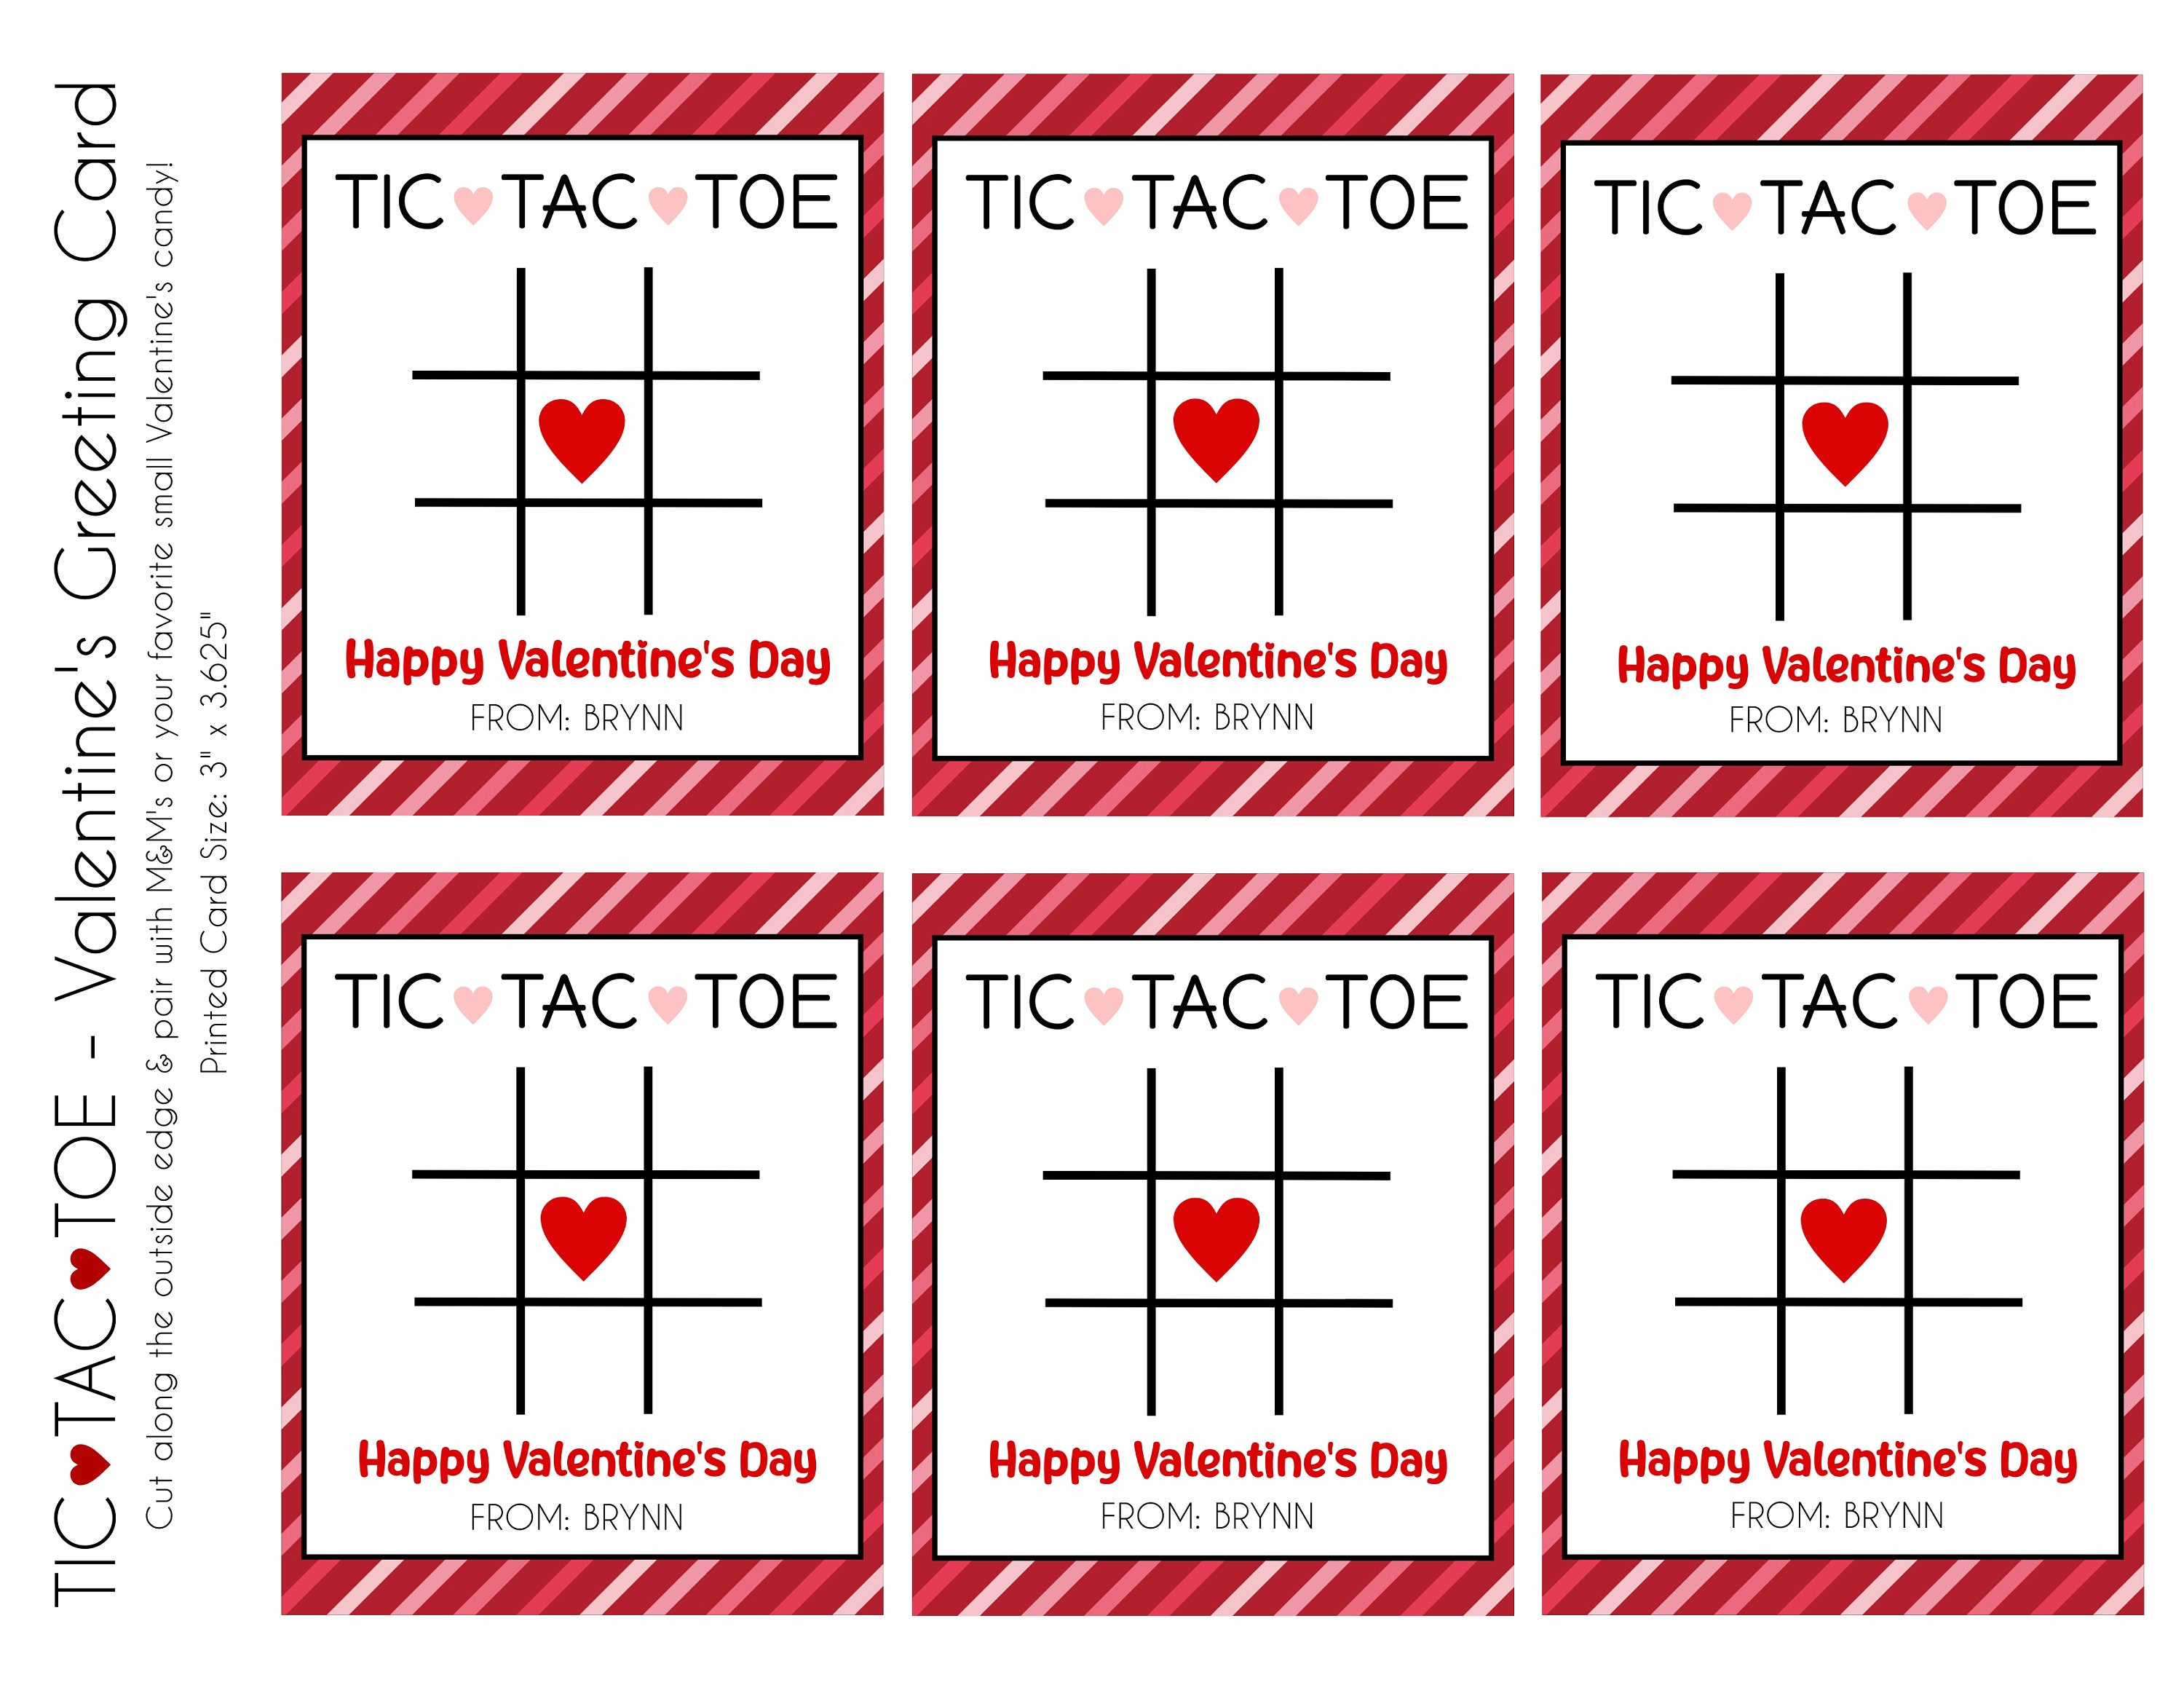 Kids Tic Tac Toe Valentines Day Card, School Valentine, Valentines for Kids,  Game Valentine for Kids, Valentine Candy Favor 